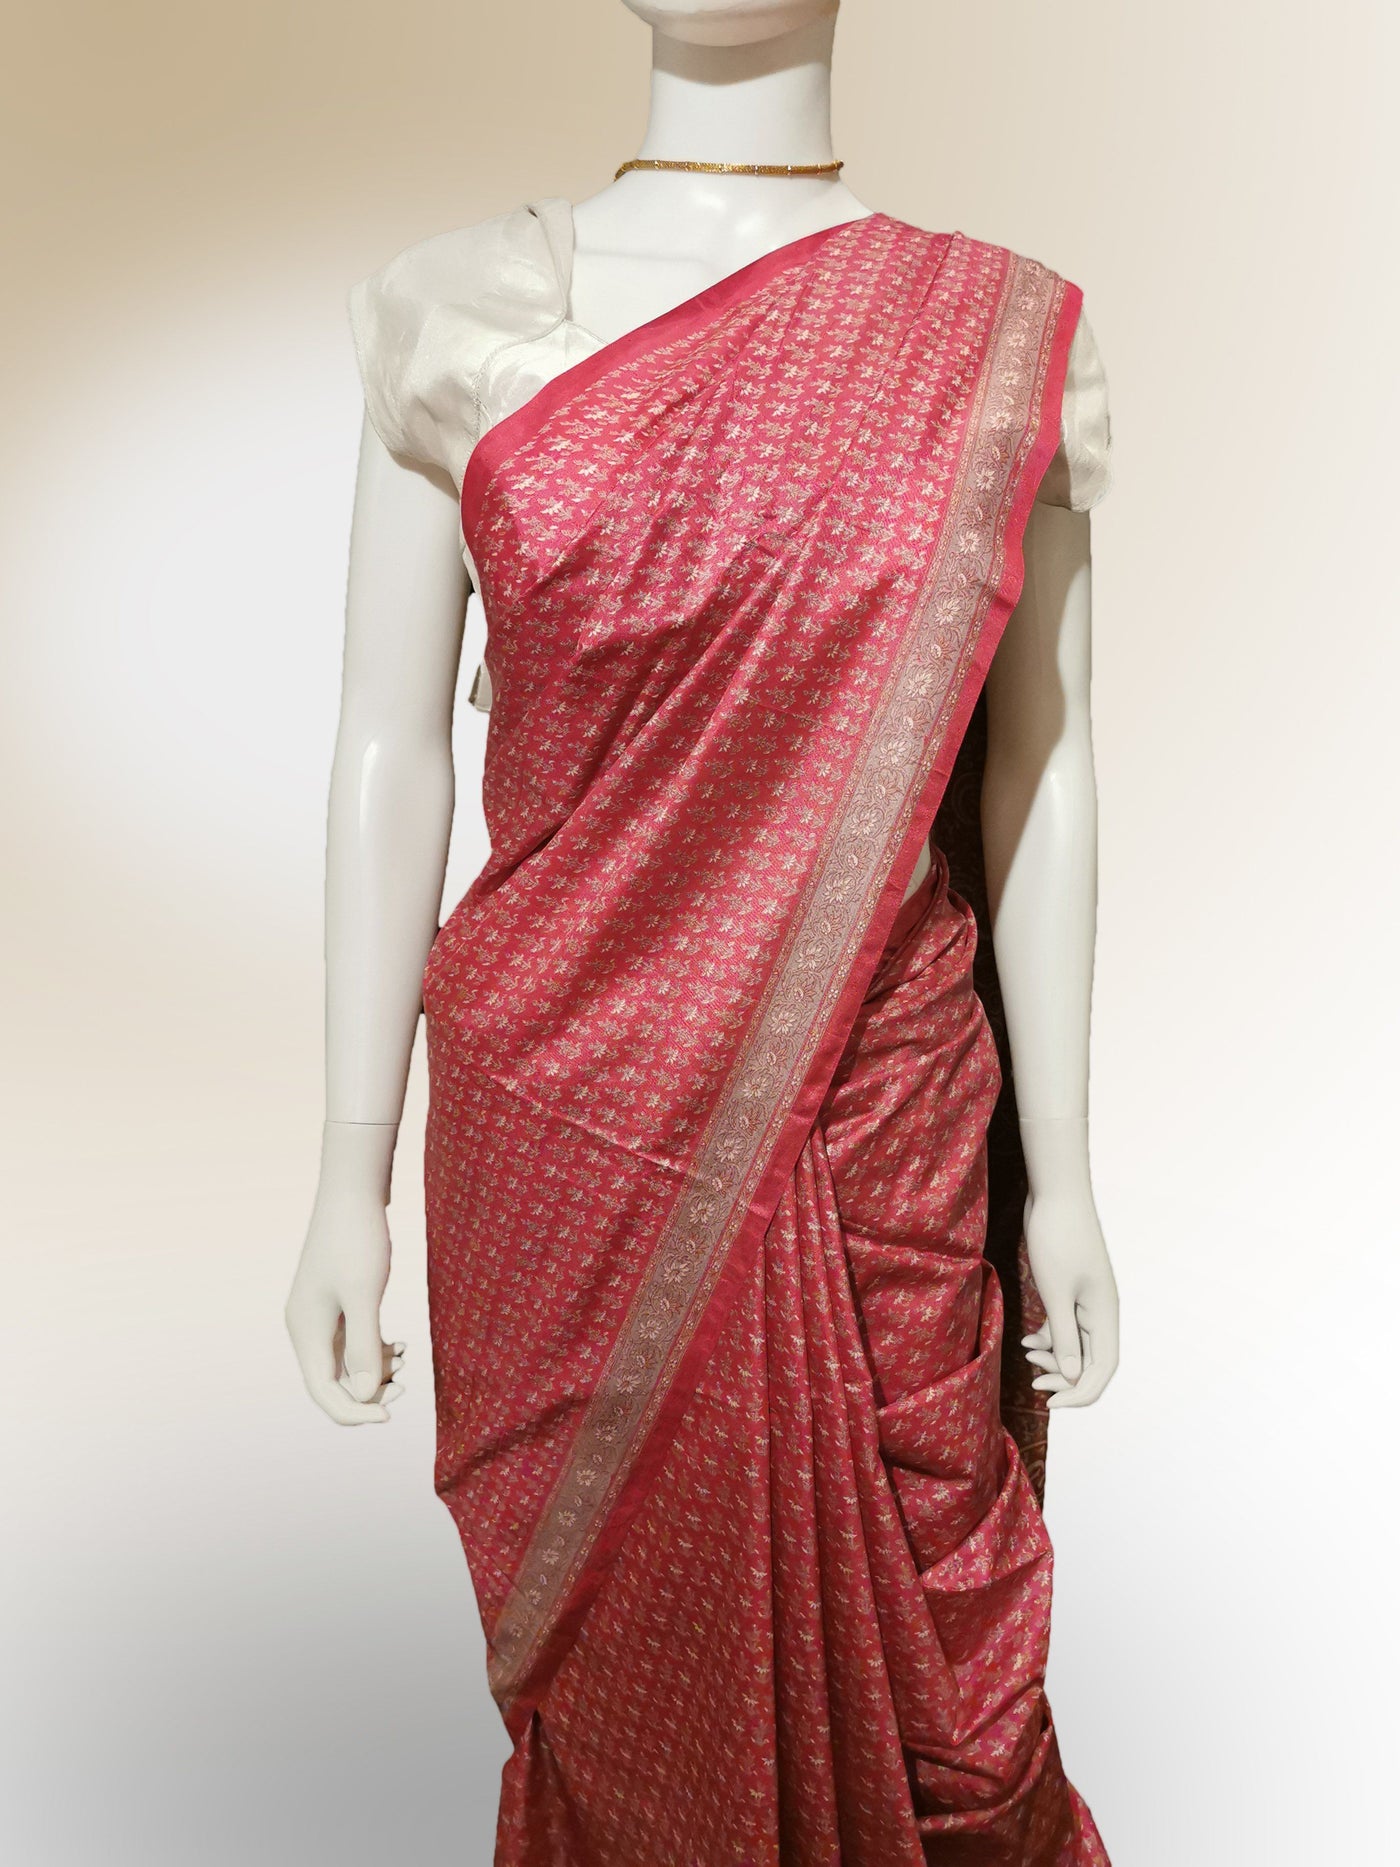 Saree in Pink and Gold in Traditional Print - Indian Clothing in Denver, CO, Aurora, CO, Boulder, CO, Fort Collins, CO, Colorado Springs, CO, Parker, CO, Highlands Ranch, CO, Cherry Creek, CO, Centennial, CO, and Longmont, CO. Nationwide shipping USA - India Fashion X